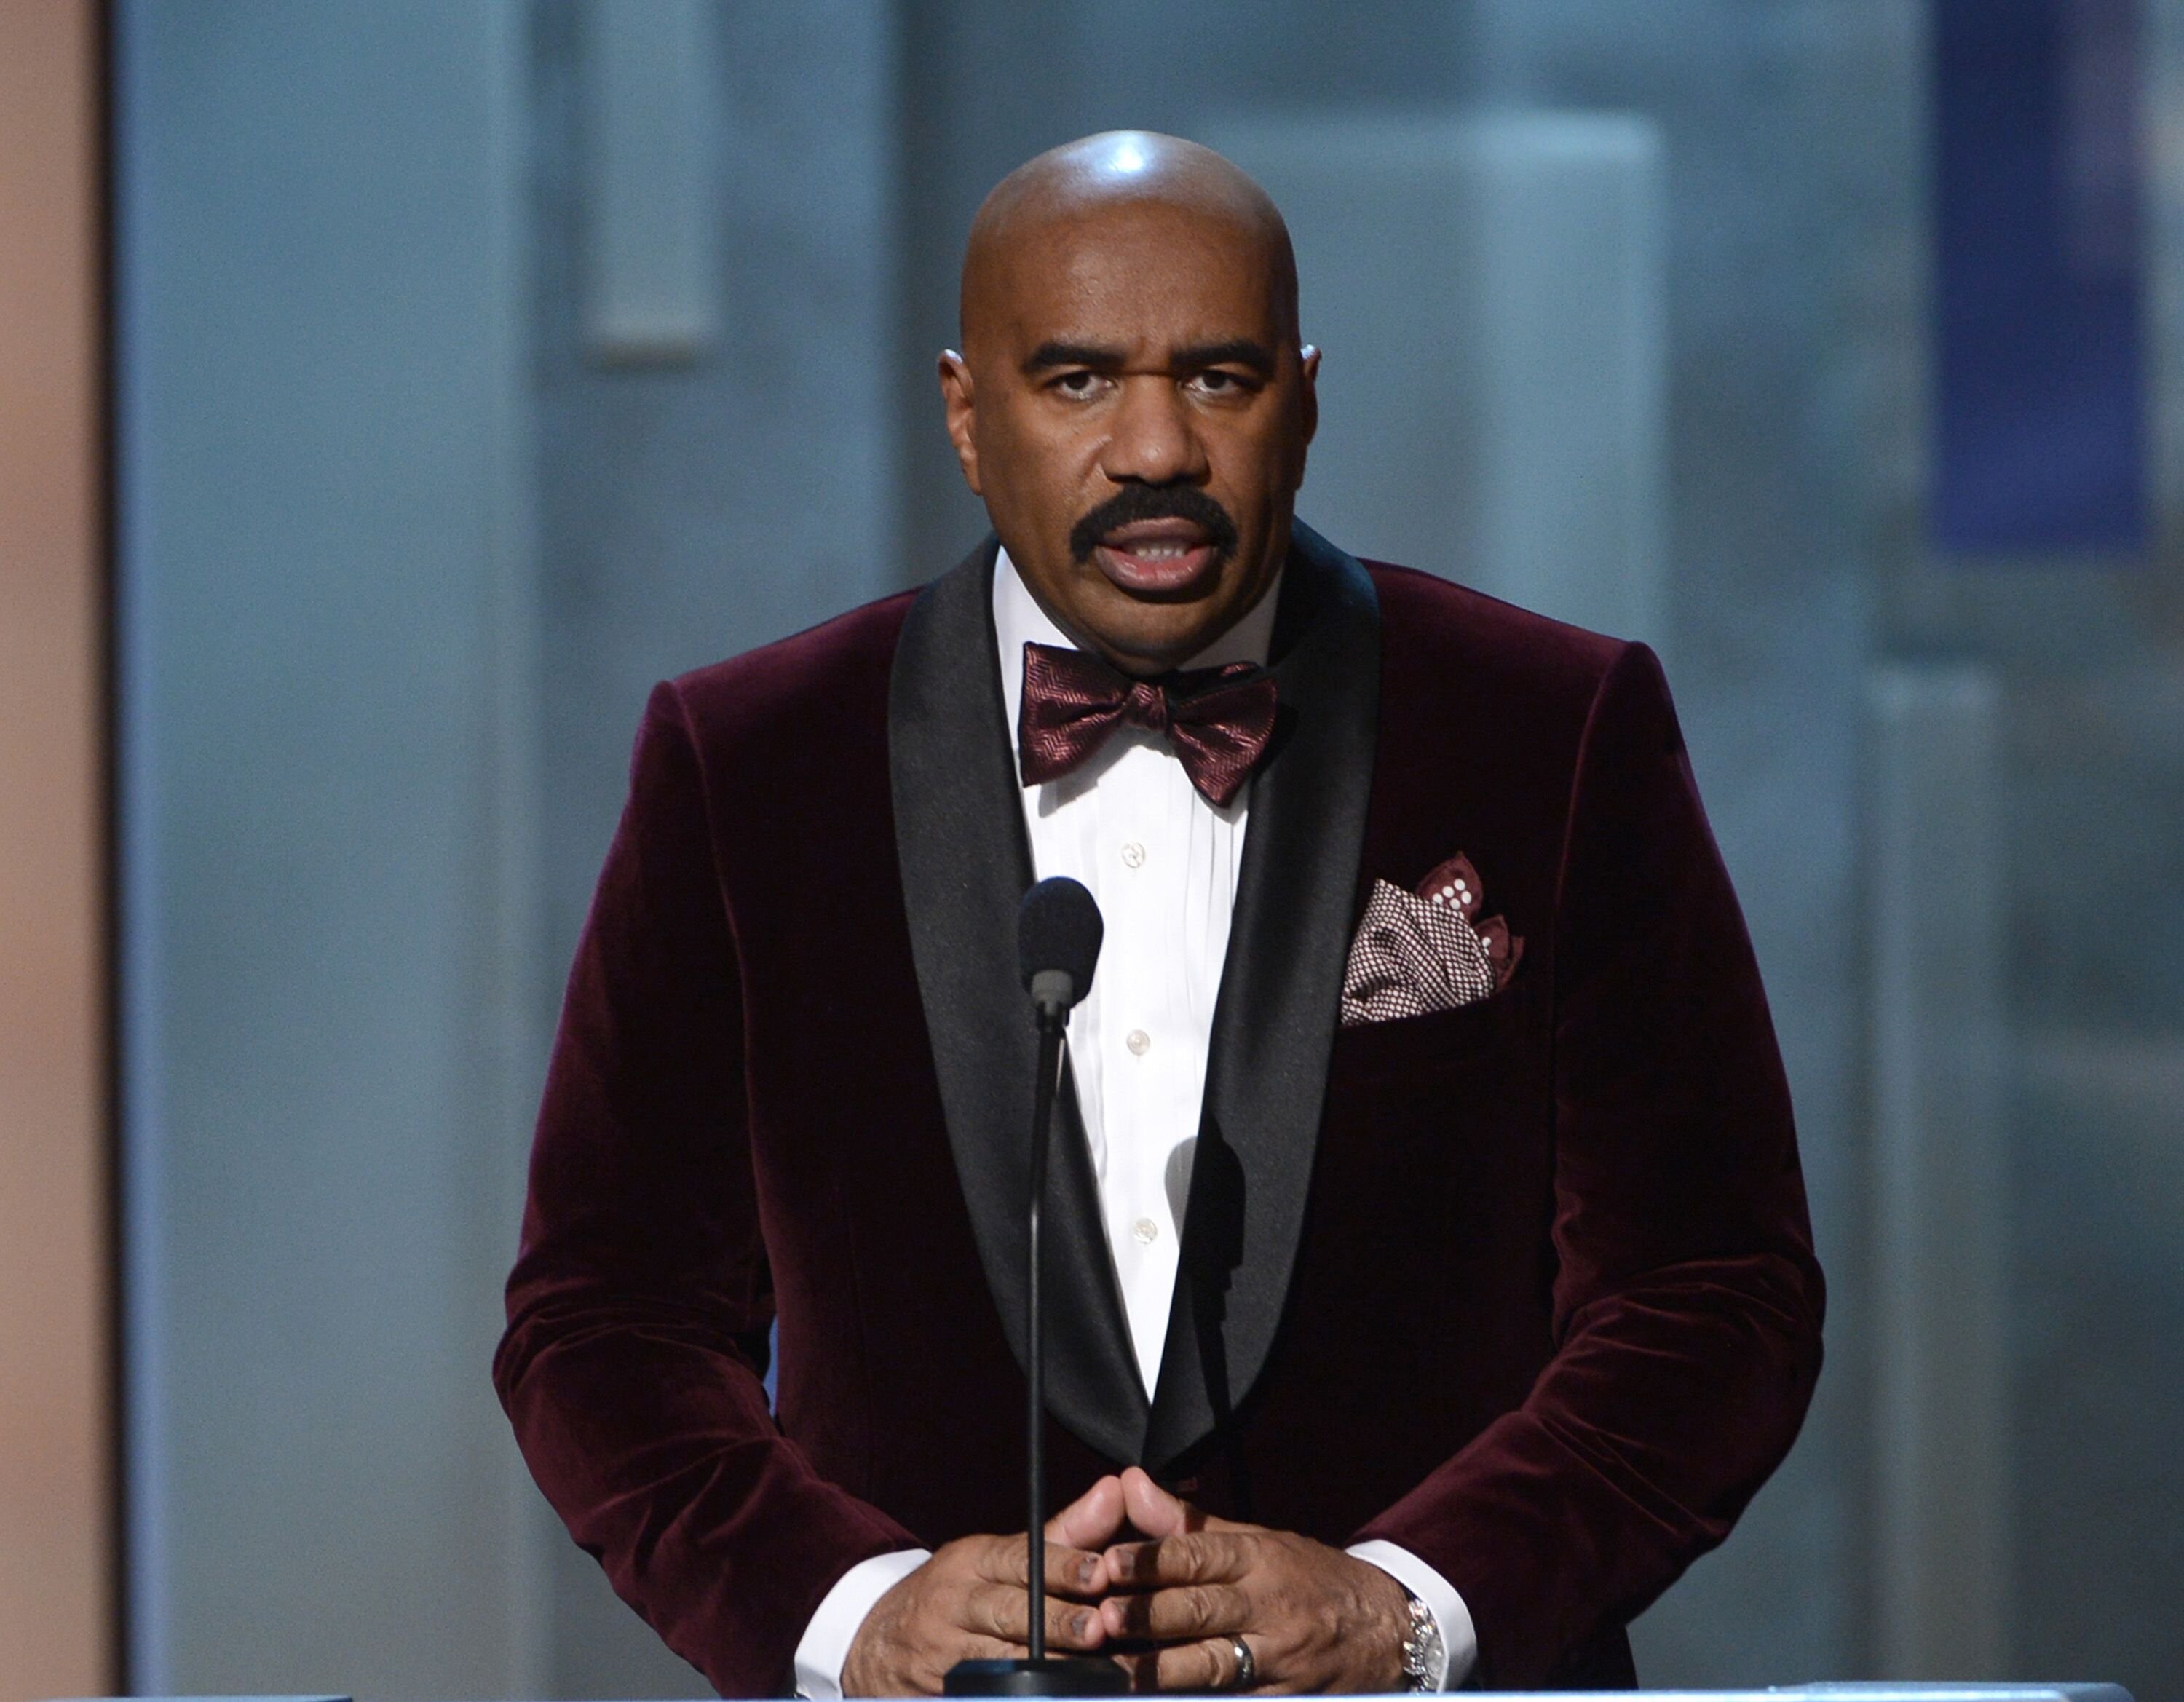 Steve Harvey onstage at the 44th NAACP Image Awards in 2013 in Los Angeles | Source: Getty Images